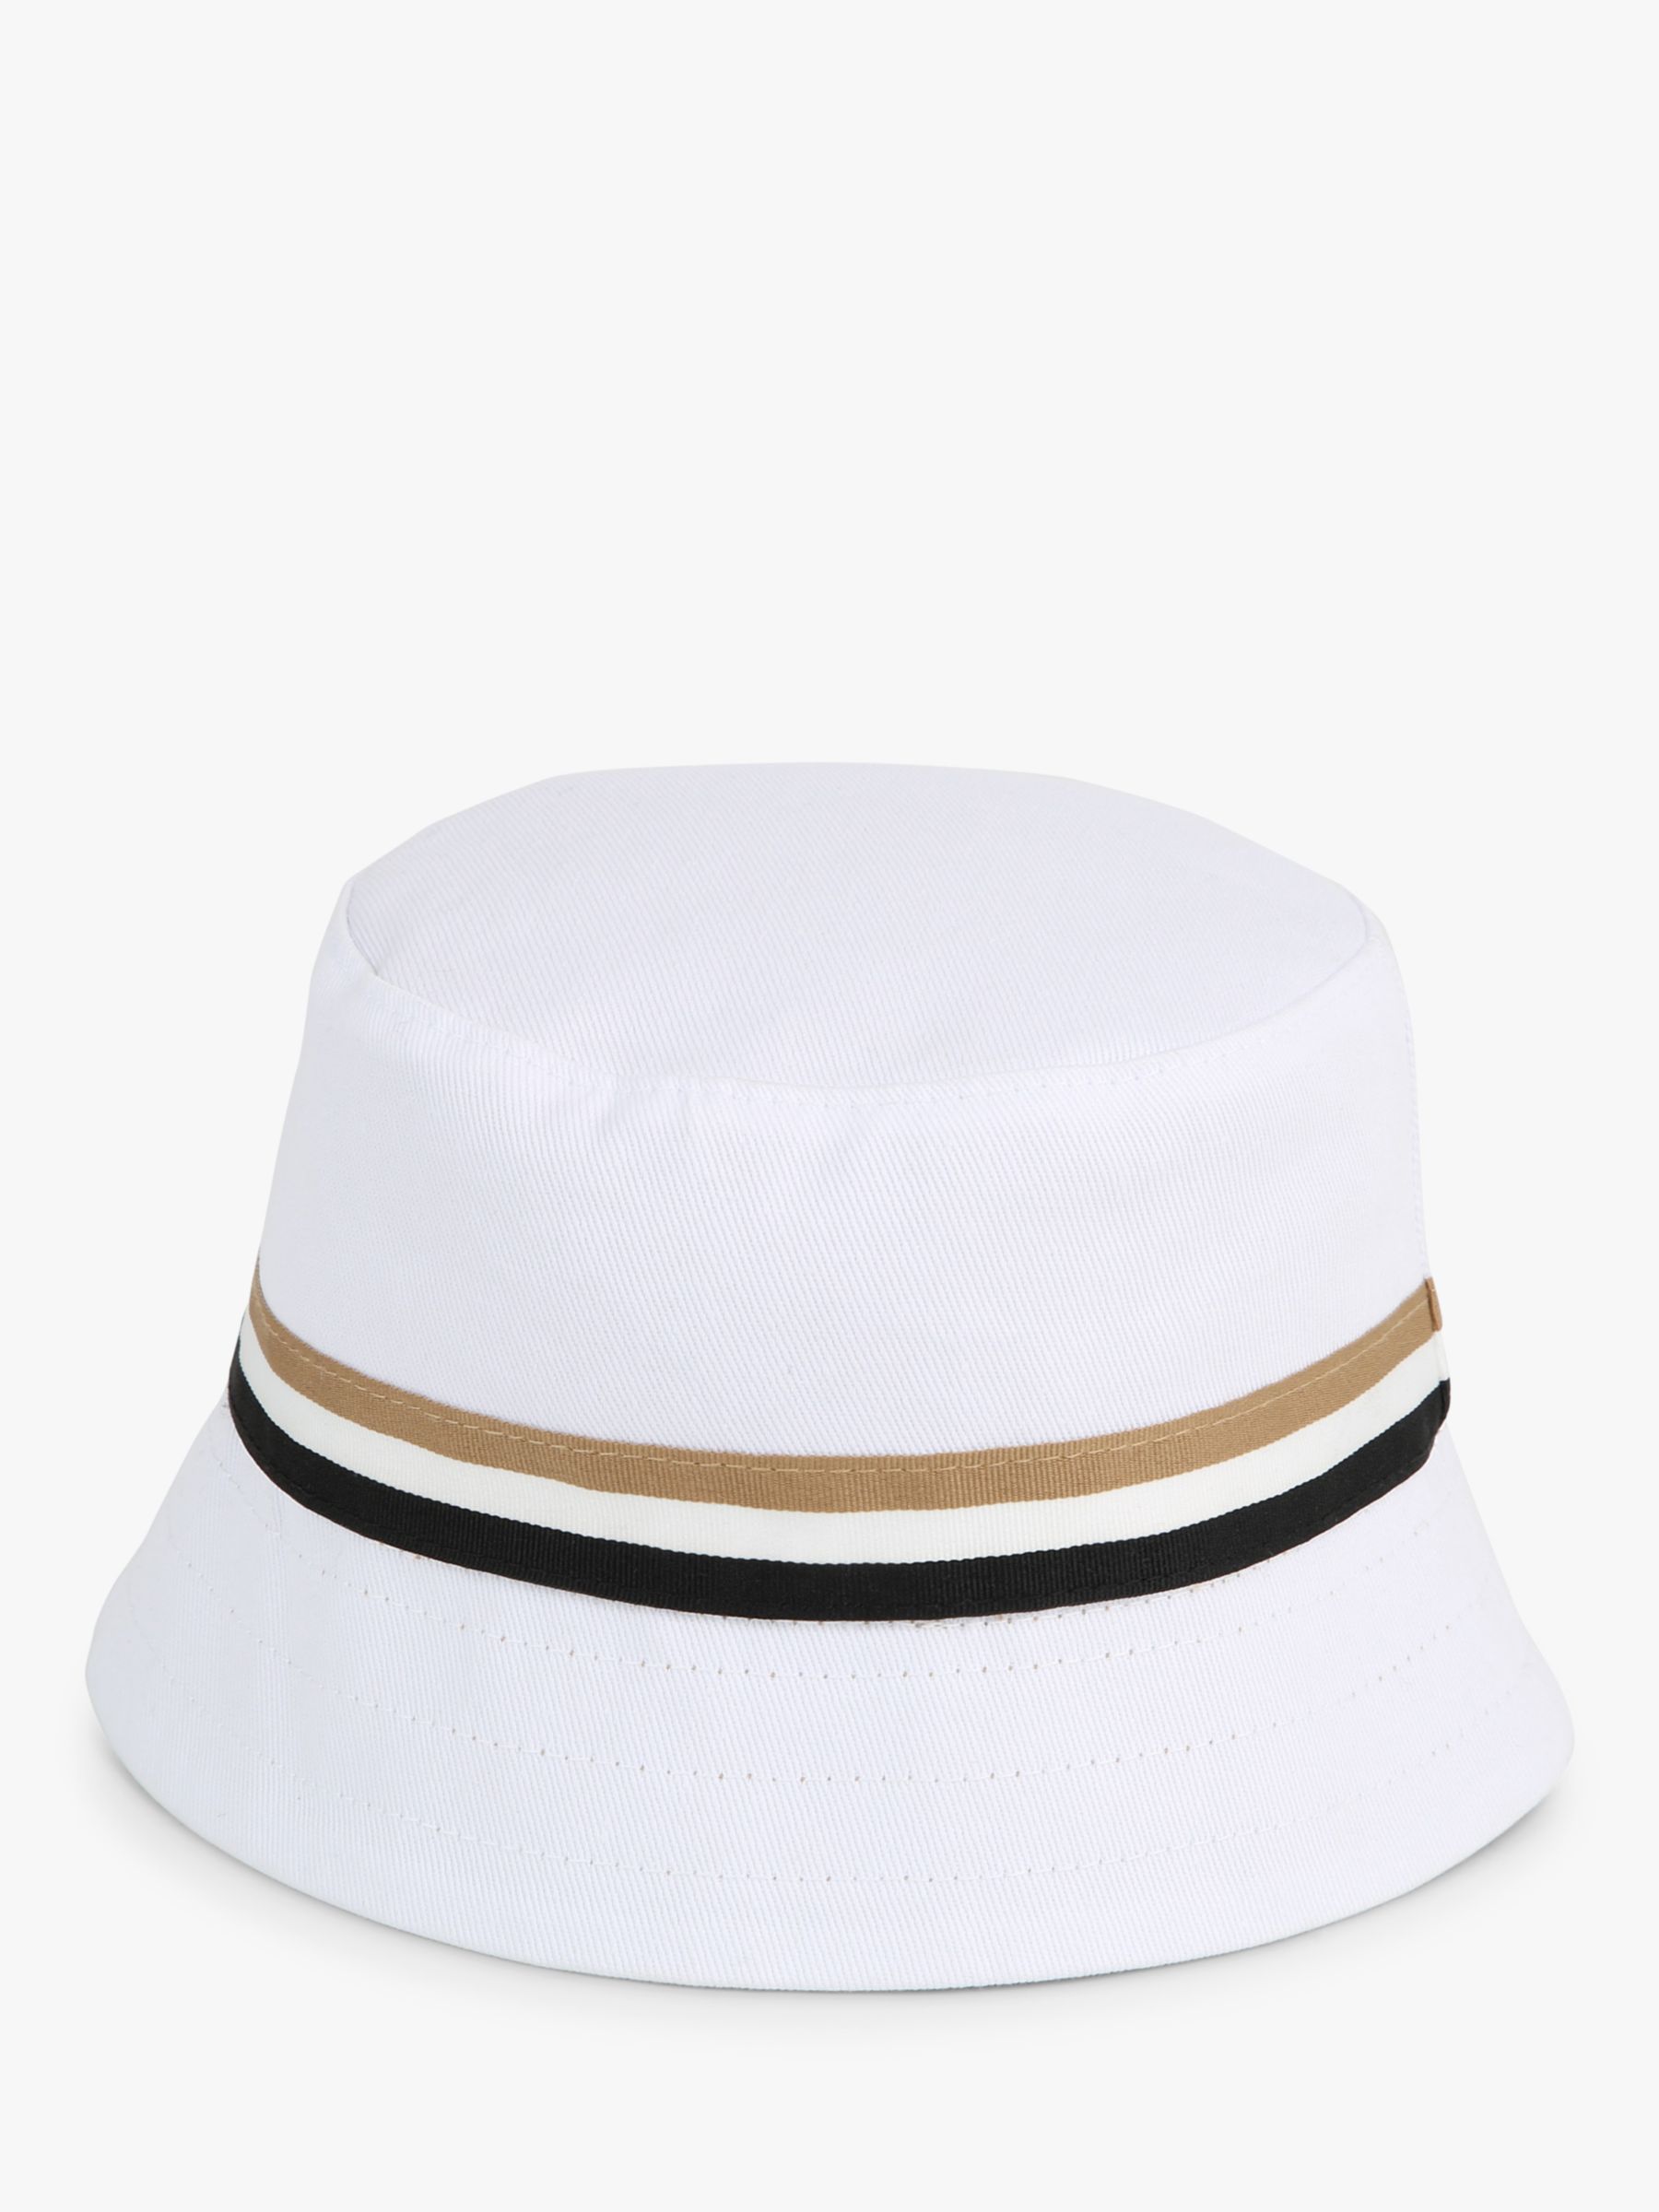 BOSS Baby Reversible Bucket Hat, White/Brown, 9-12 months